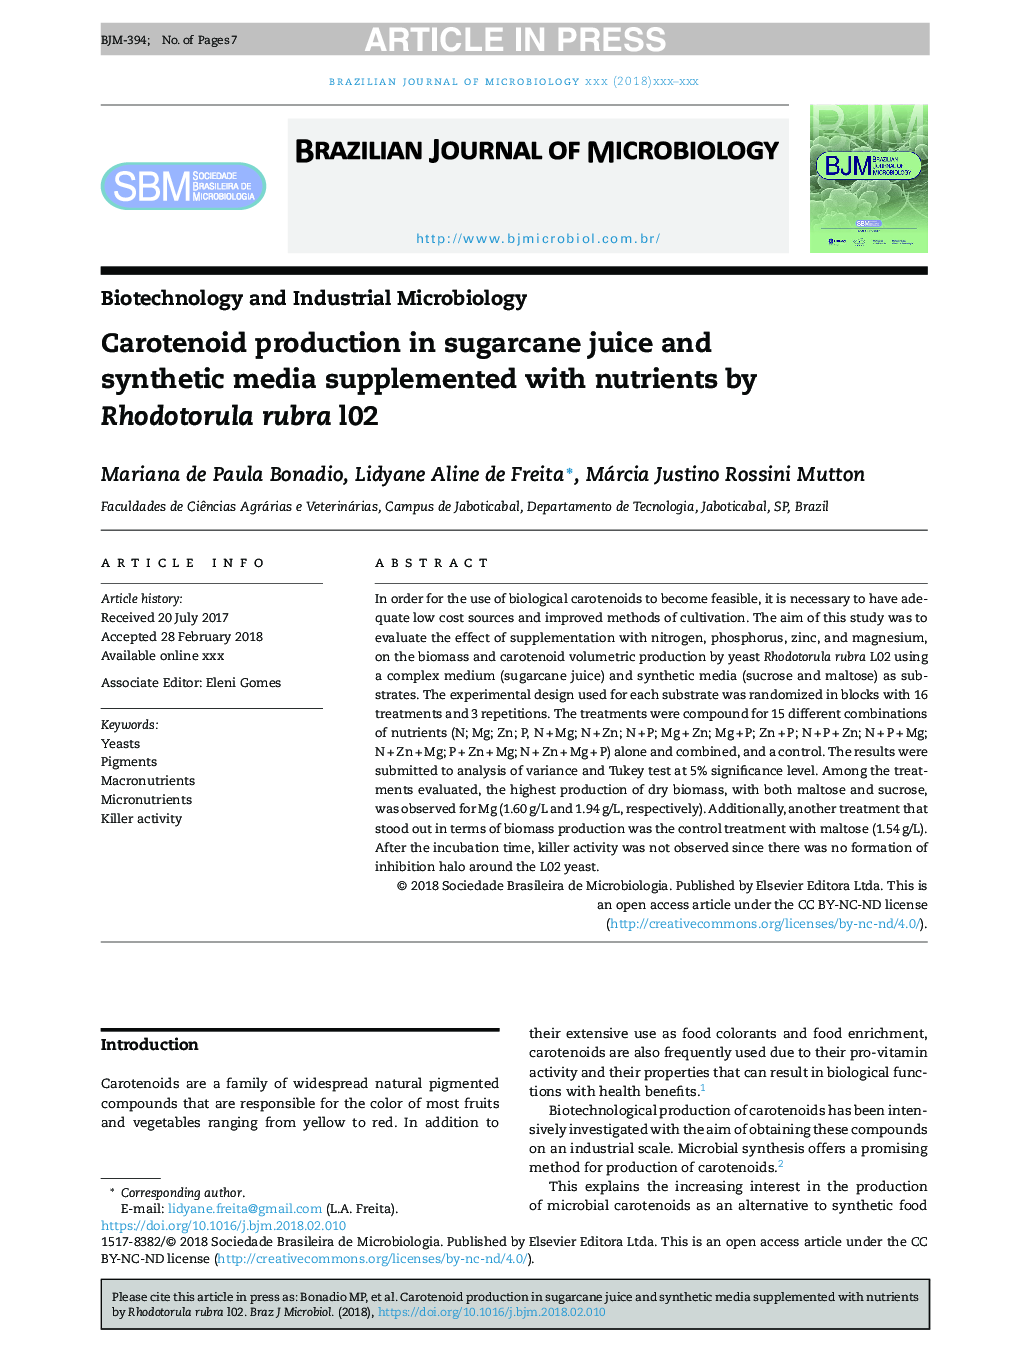 Carotenoid production in sugarcane juice and synthetic media supplemented with nutrients by Rhodotorula rubra l02